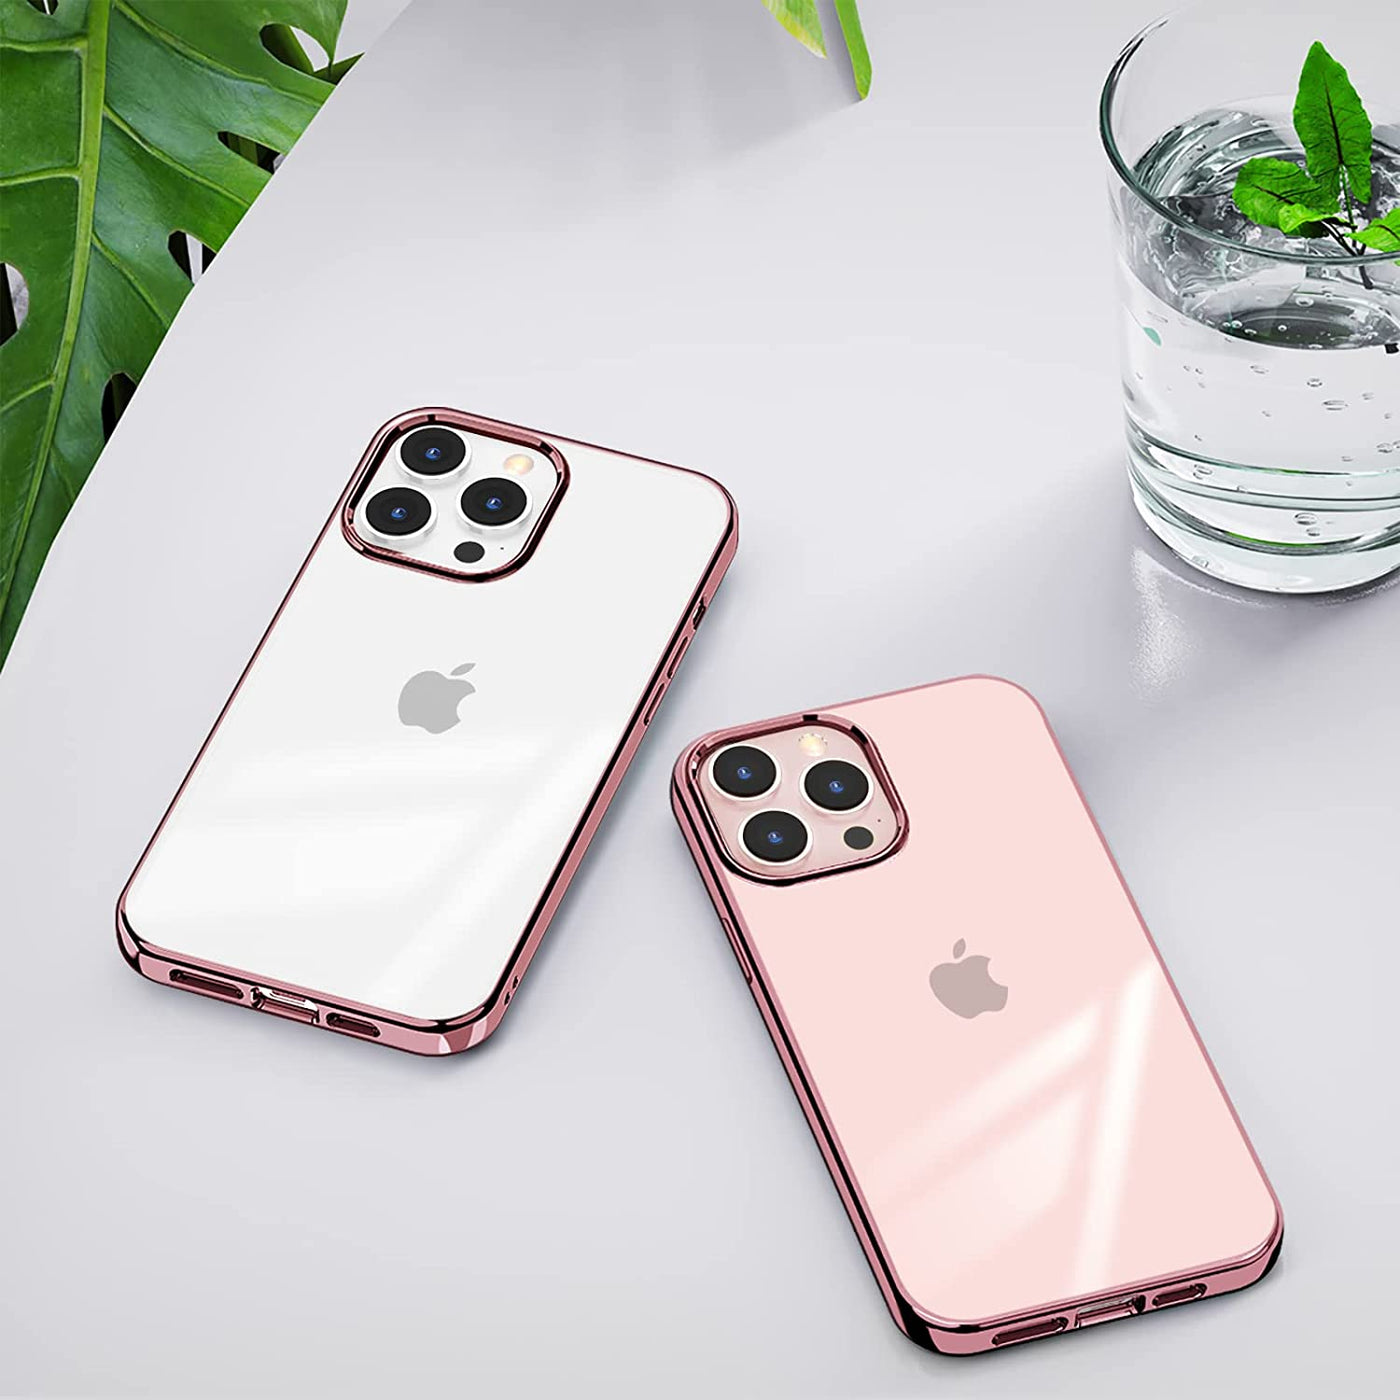 Cristal Clear Chrome Electroplated Bumper iPhone Cover